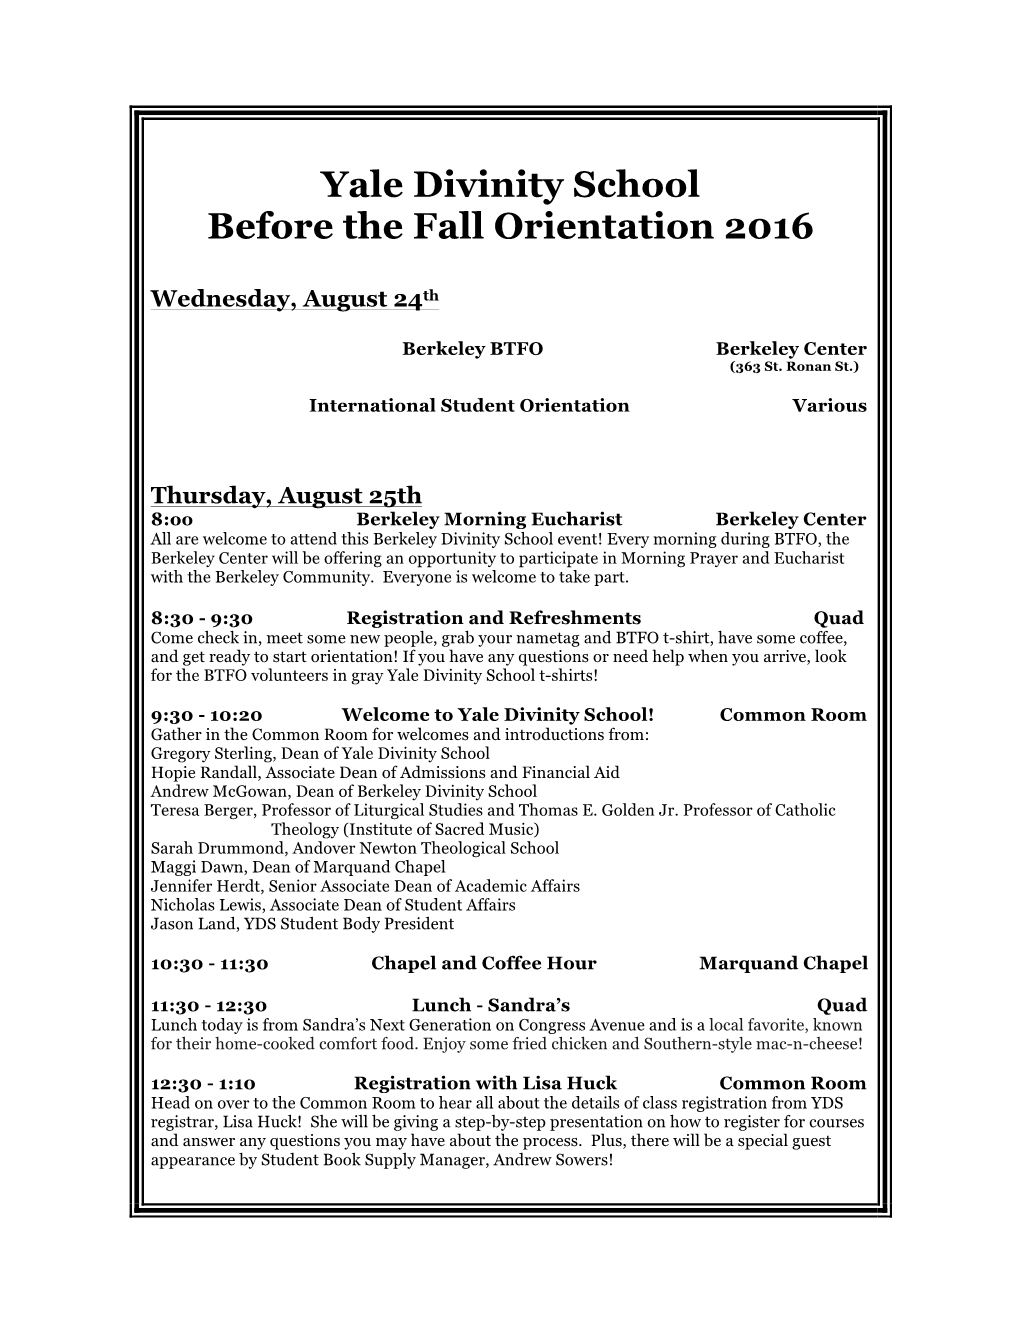 Yale Divinity School Before the Fall Orientation 2016